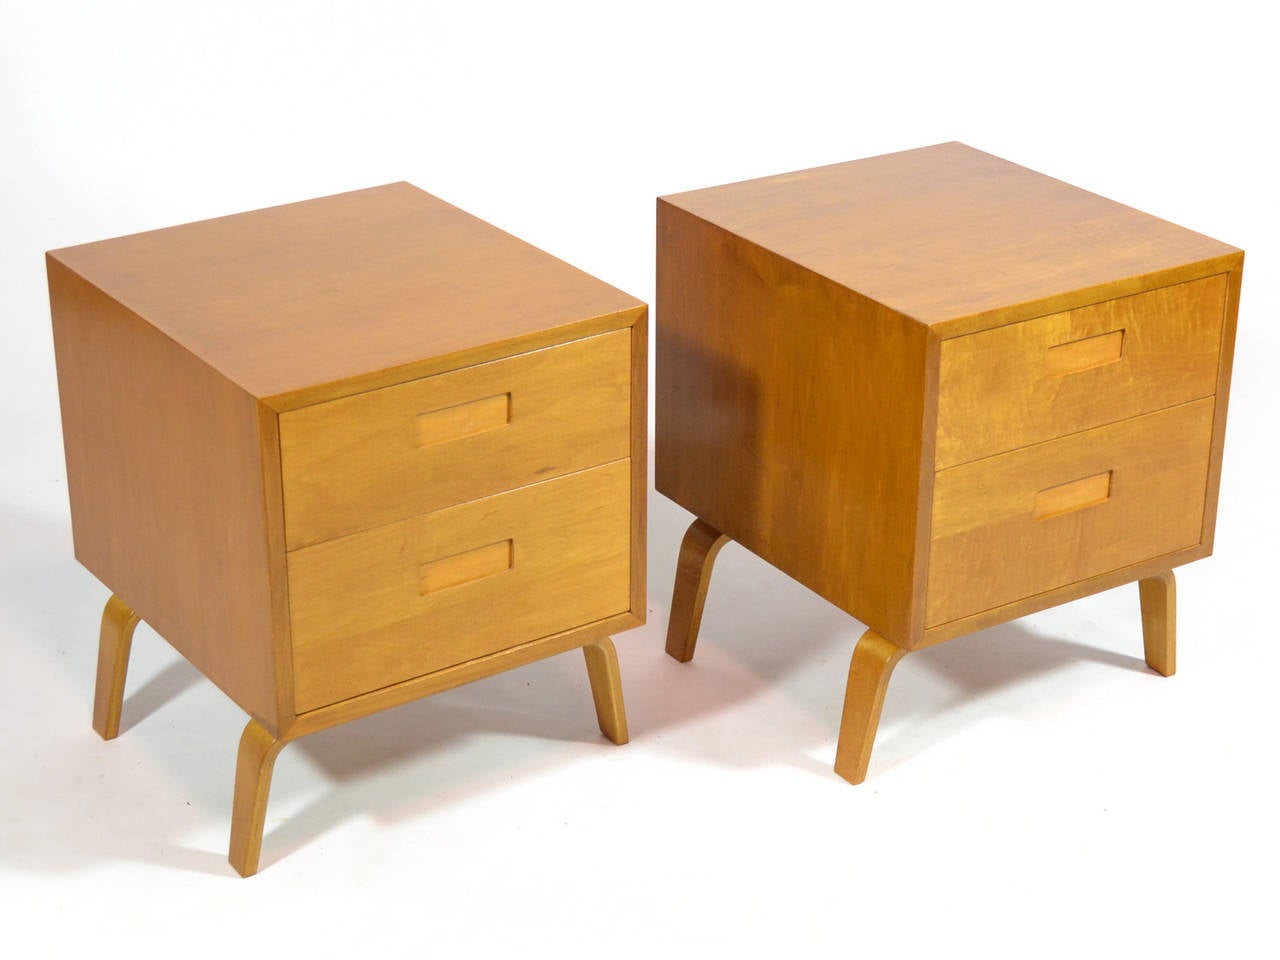 Designed by Clifford Pascoe who collaborated with Finnish master Alvar Aalto (even opening Artek-Pascoe in NYC) these tables can be used as bedside tables or end tables. They each have two drawers with inset spring-loaded pulls and are supported by